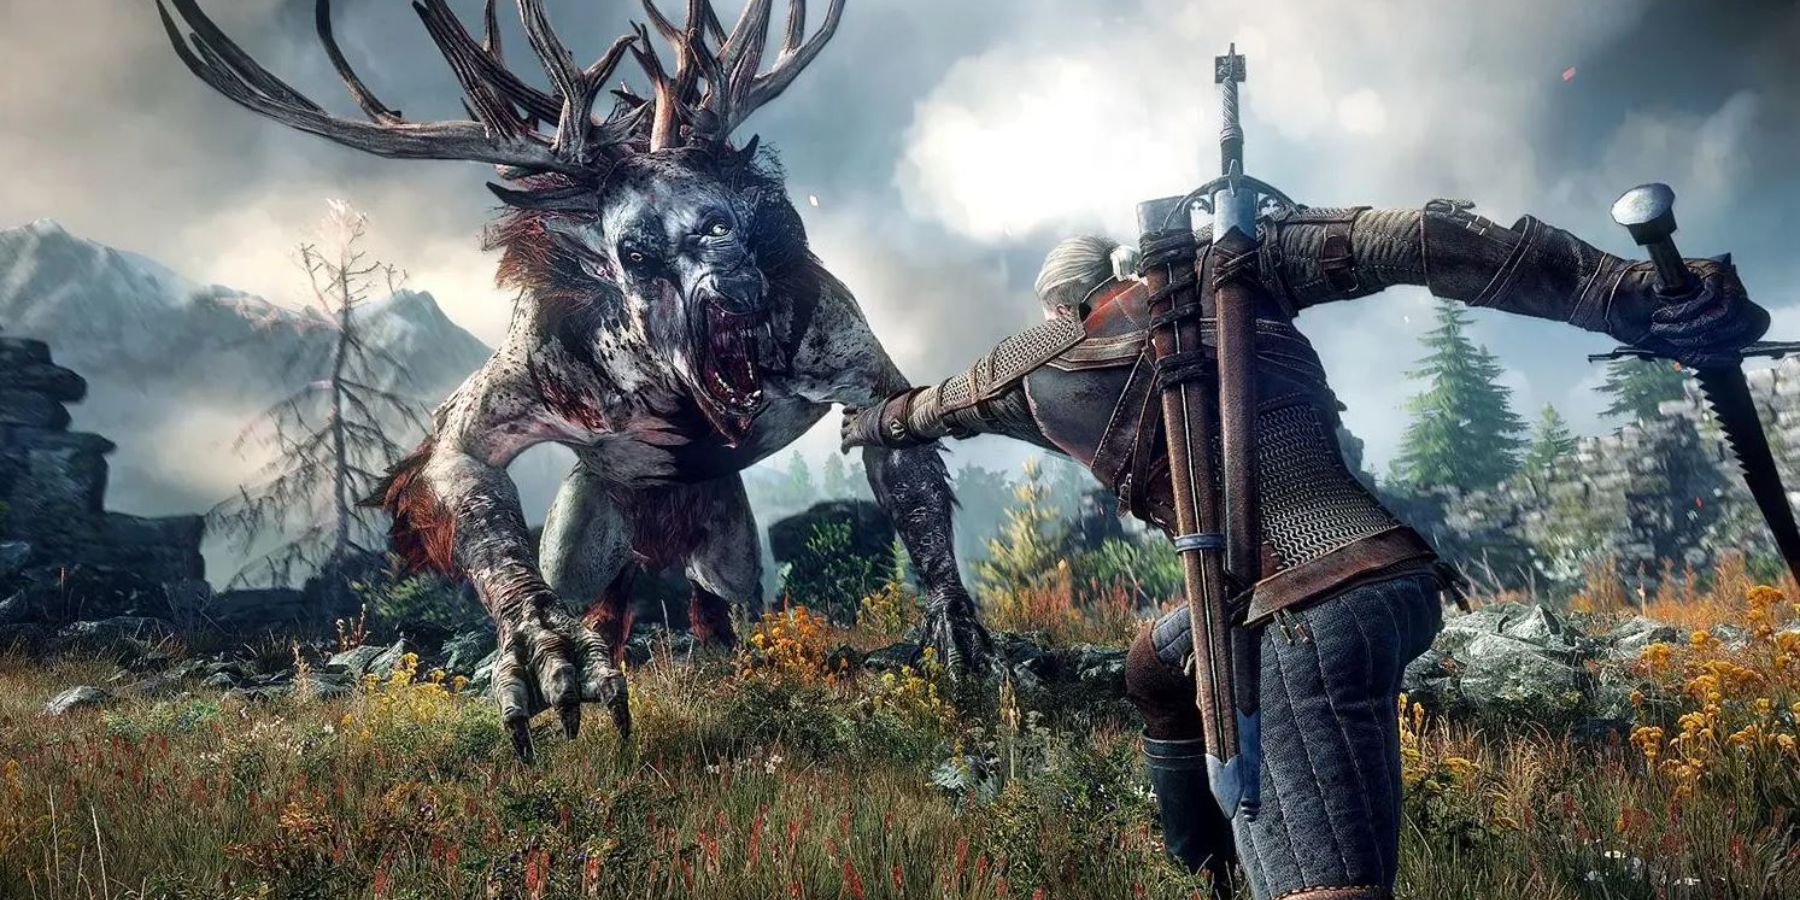 Geralt about to engage a wild beast